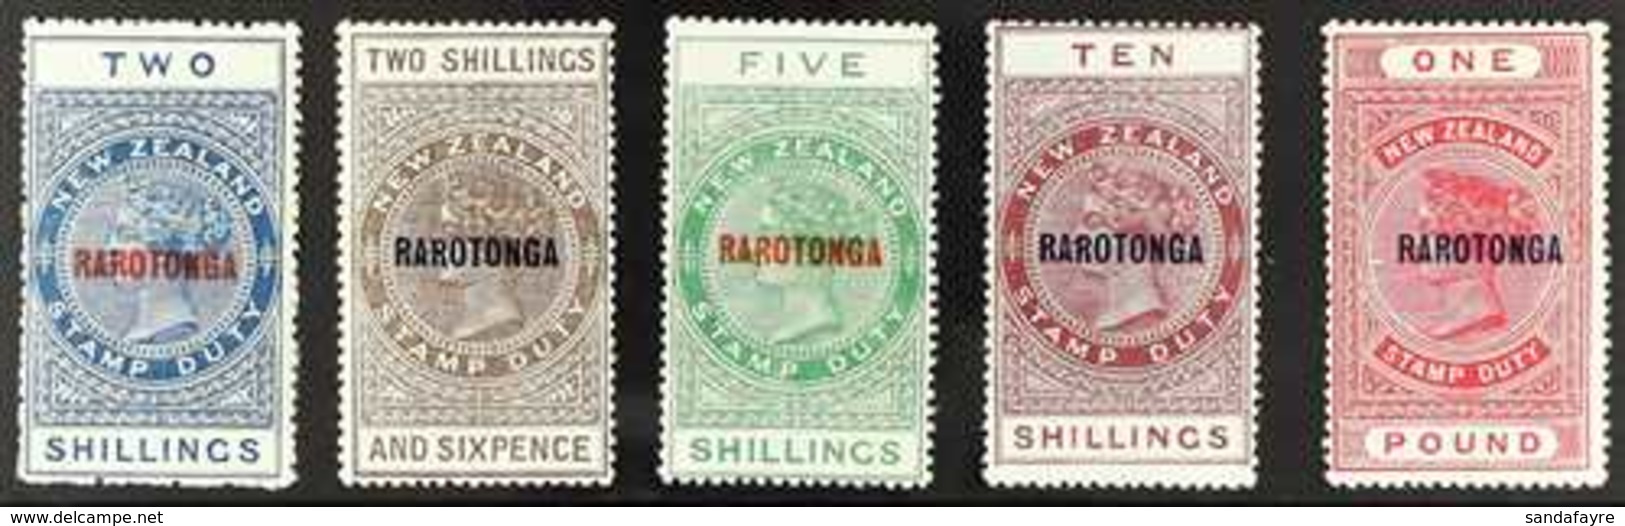 1921-23 Postal Fiscals Stamps With "RAROTONGA" Overprints Complete Set, SG 76/80, Fine Mint, Very Fresh. (5 Stamps) For  - Cook Islands